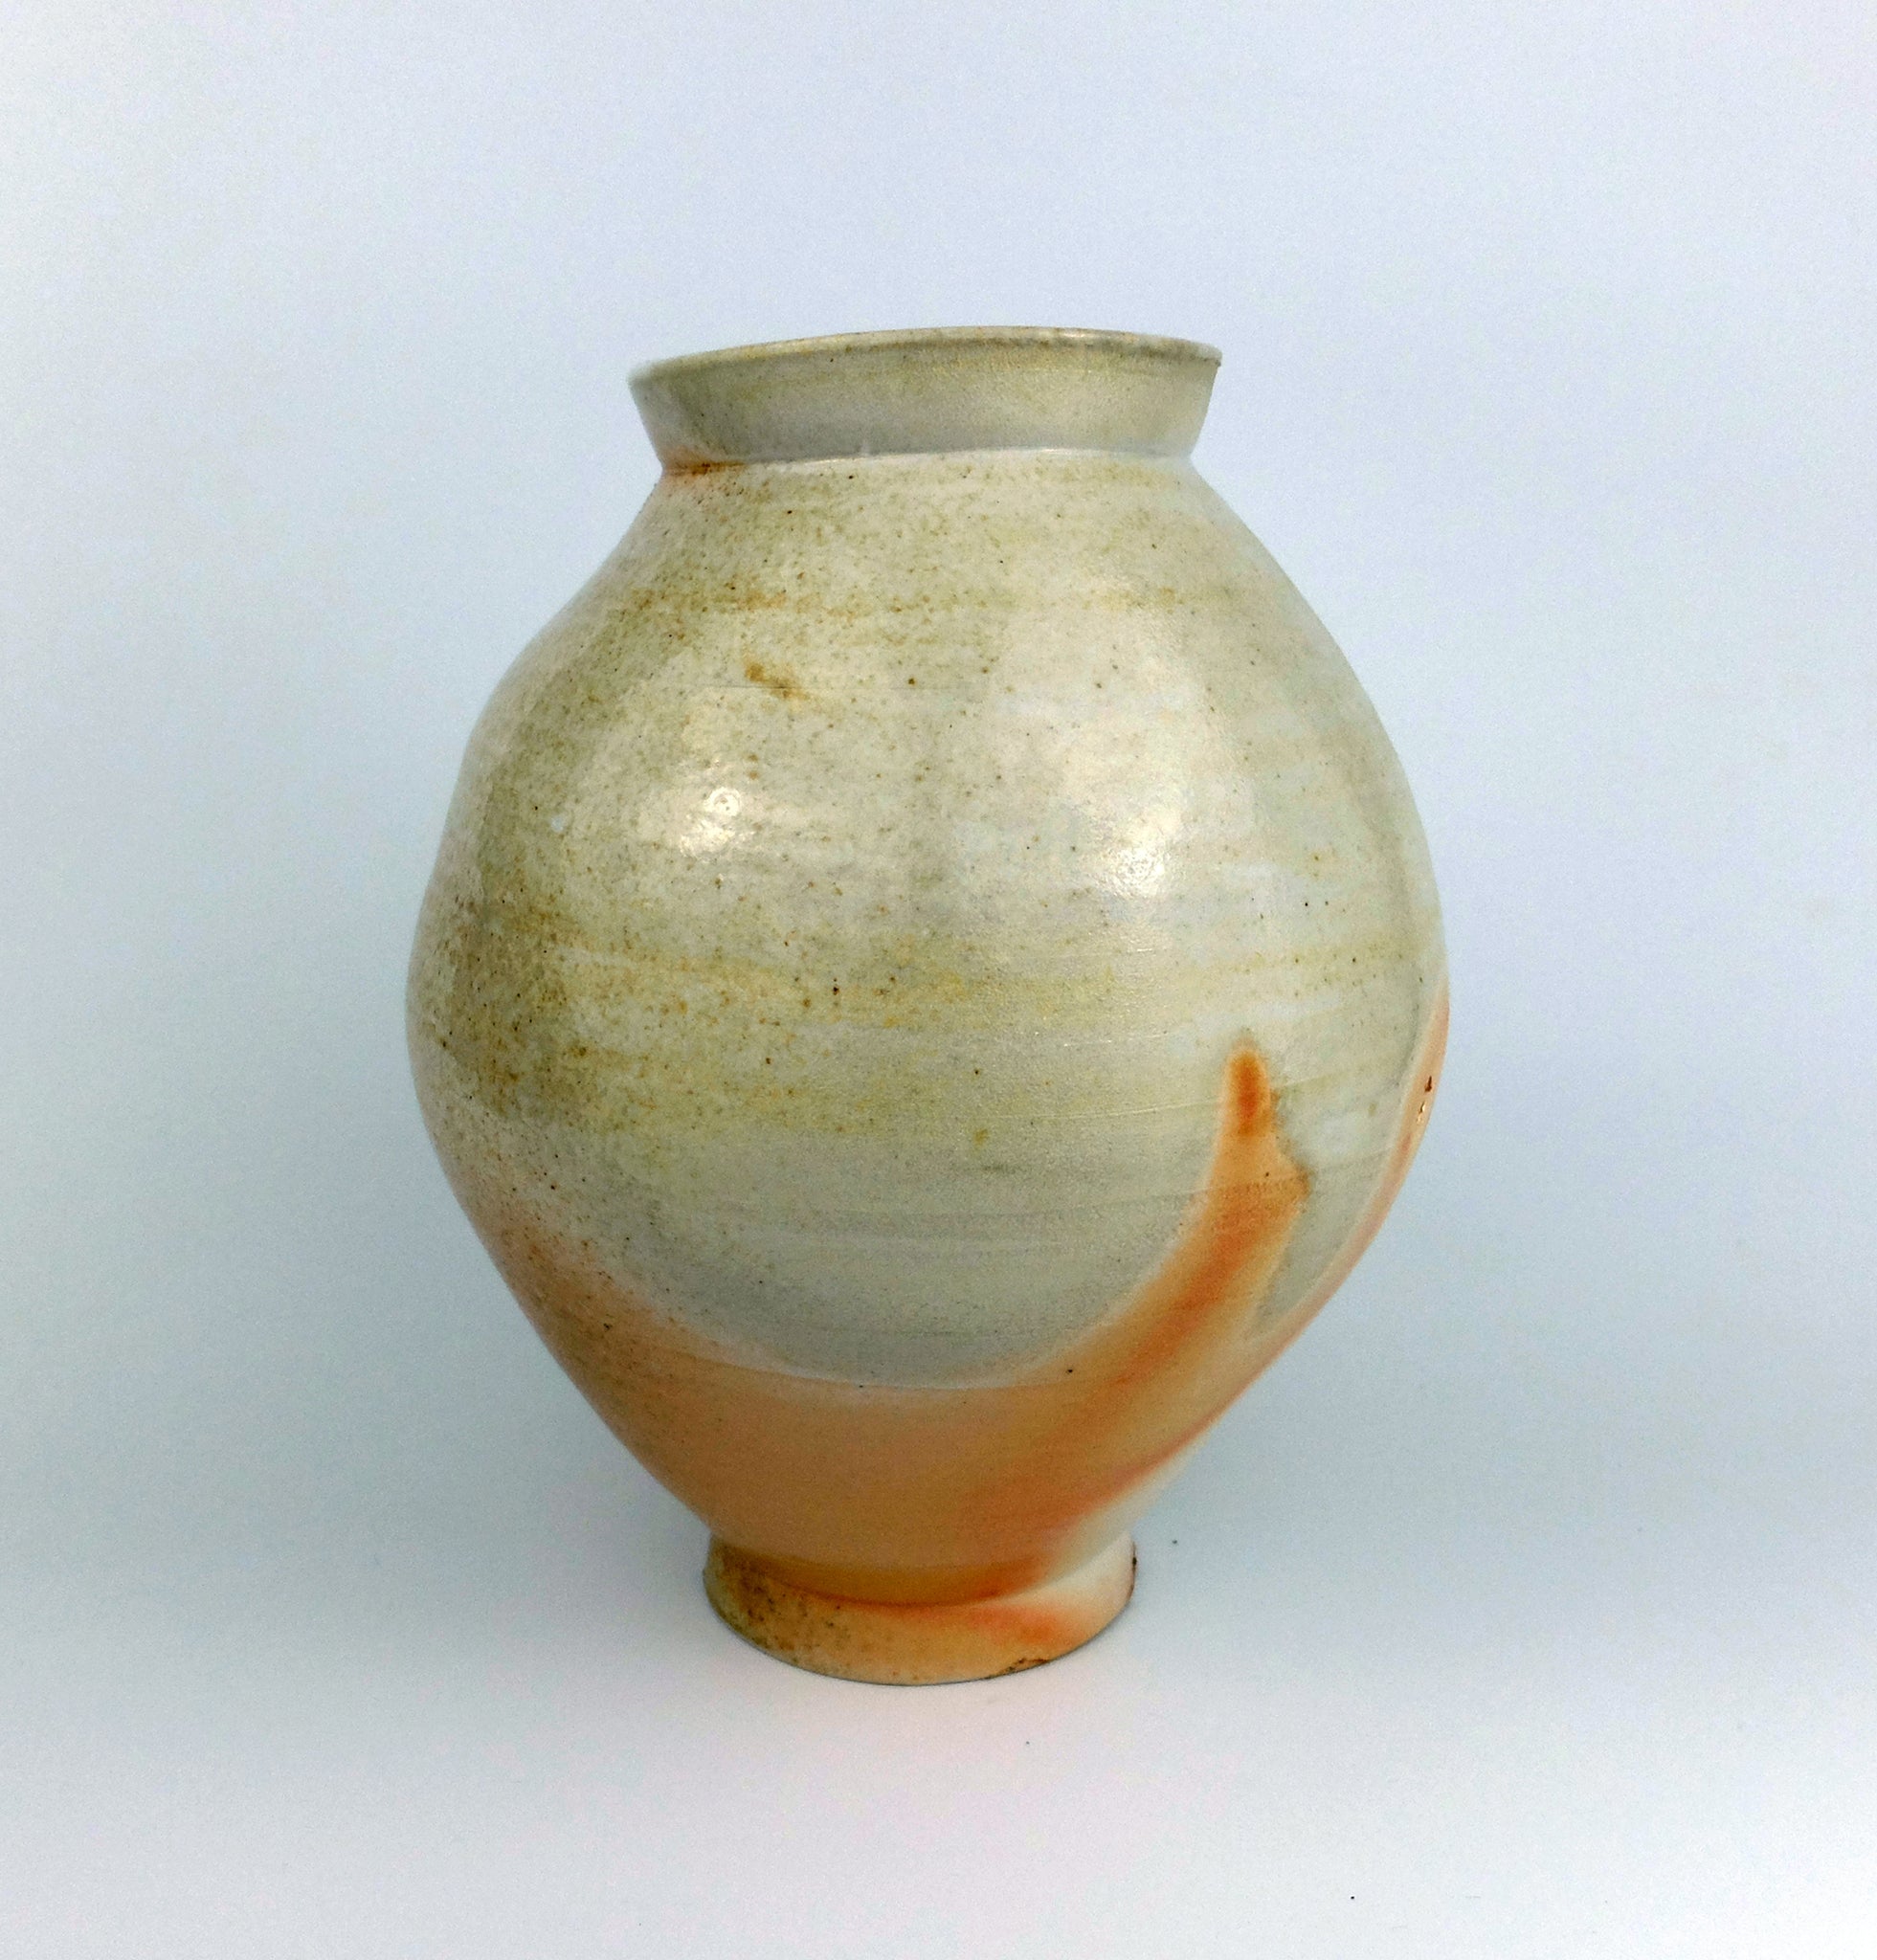 Nicholas Oh, "Wood Fired Jar by Dave Kim the Potter"